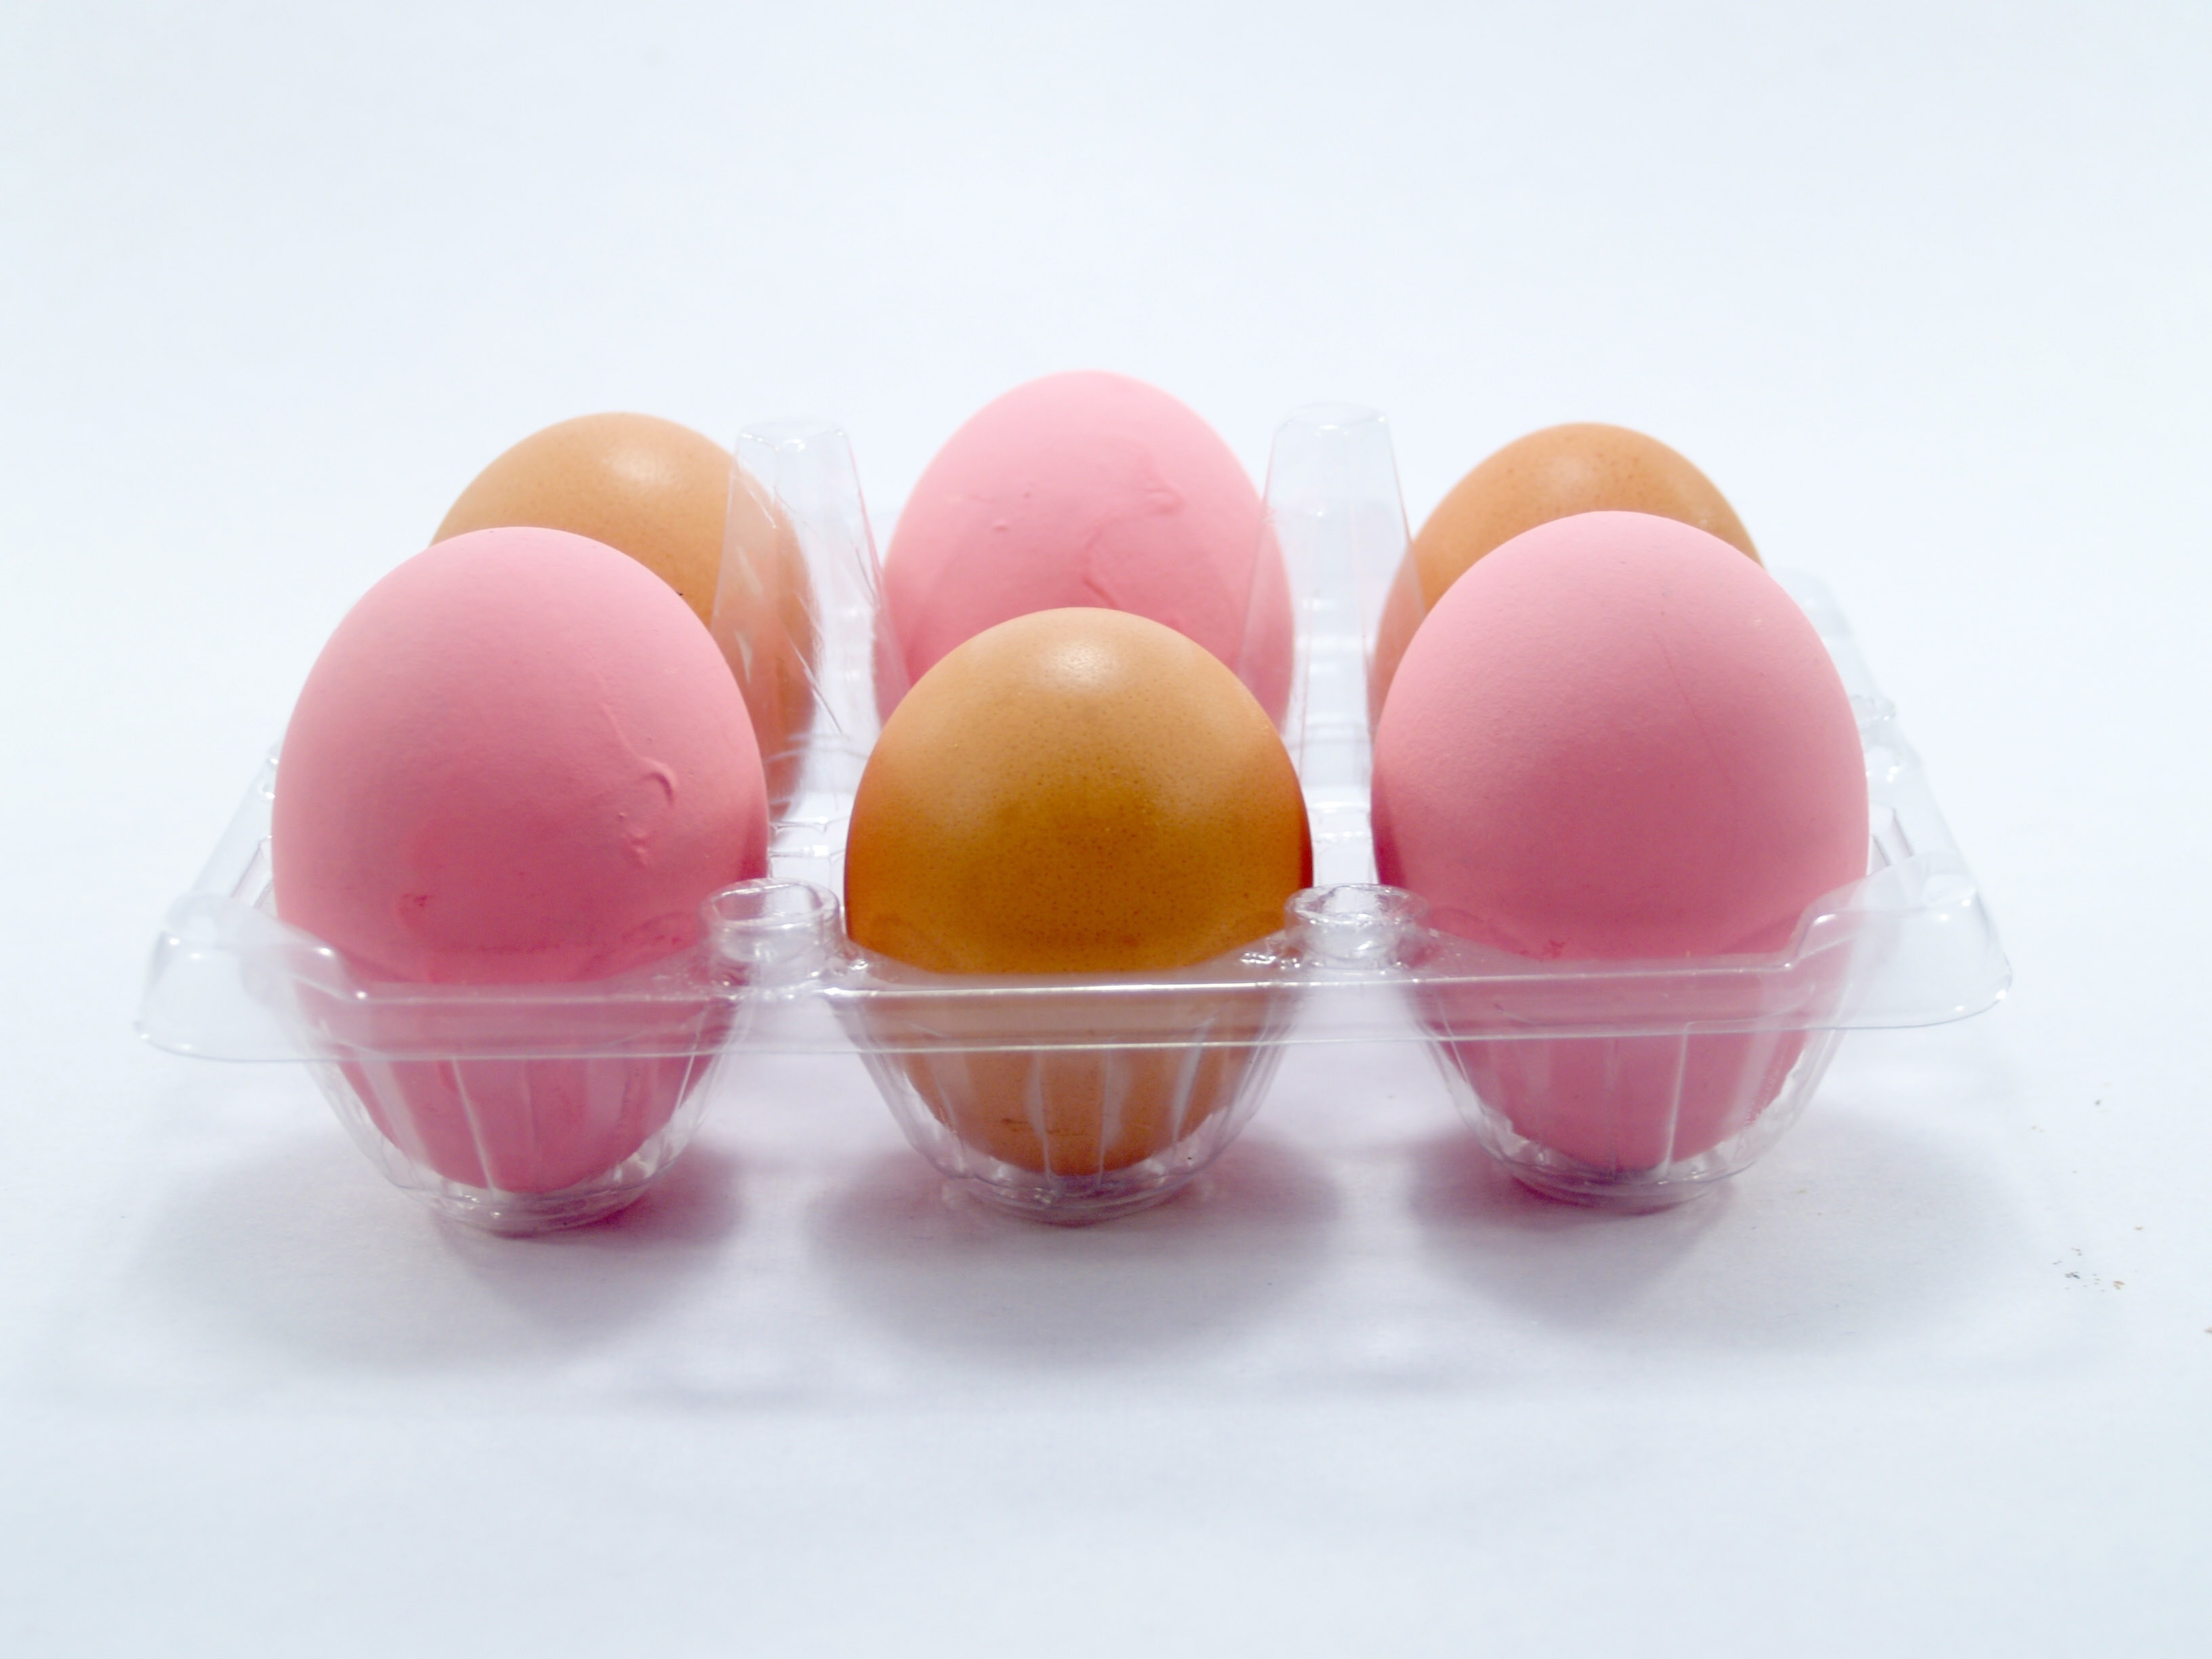 6 brown and pink eggs on plastic container